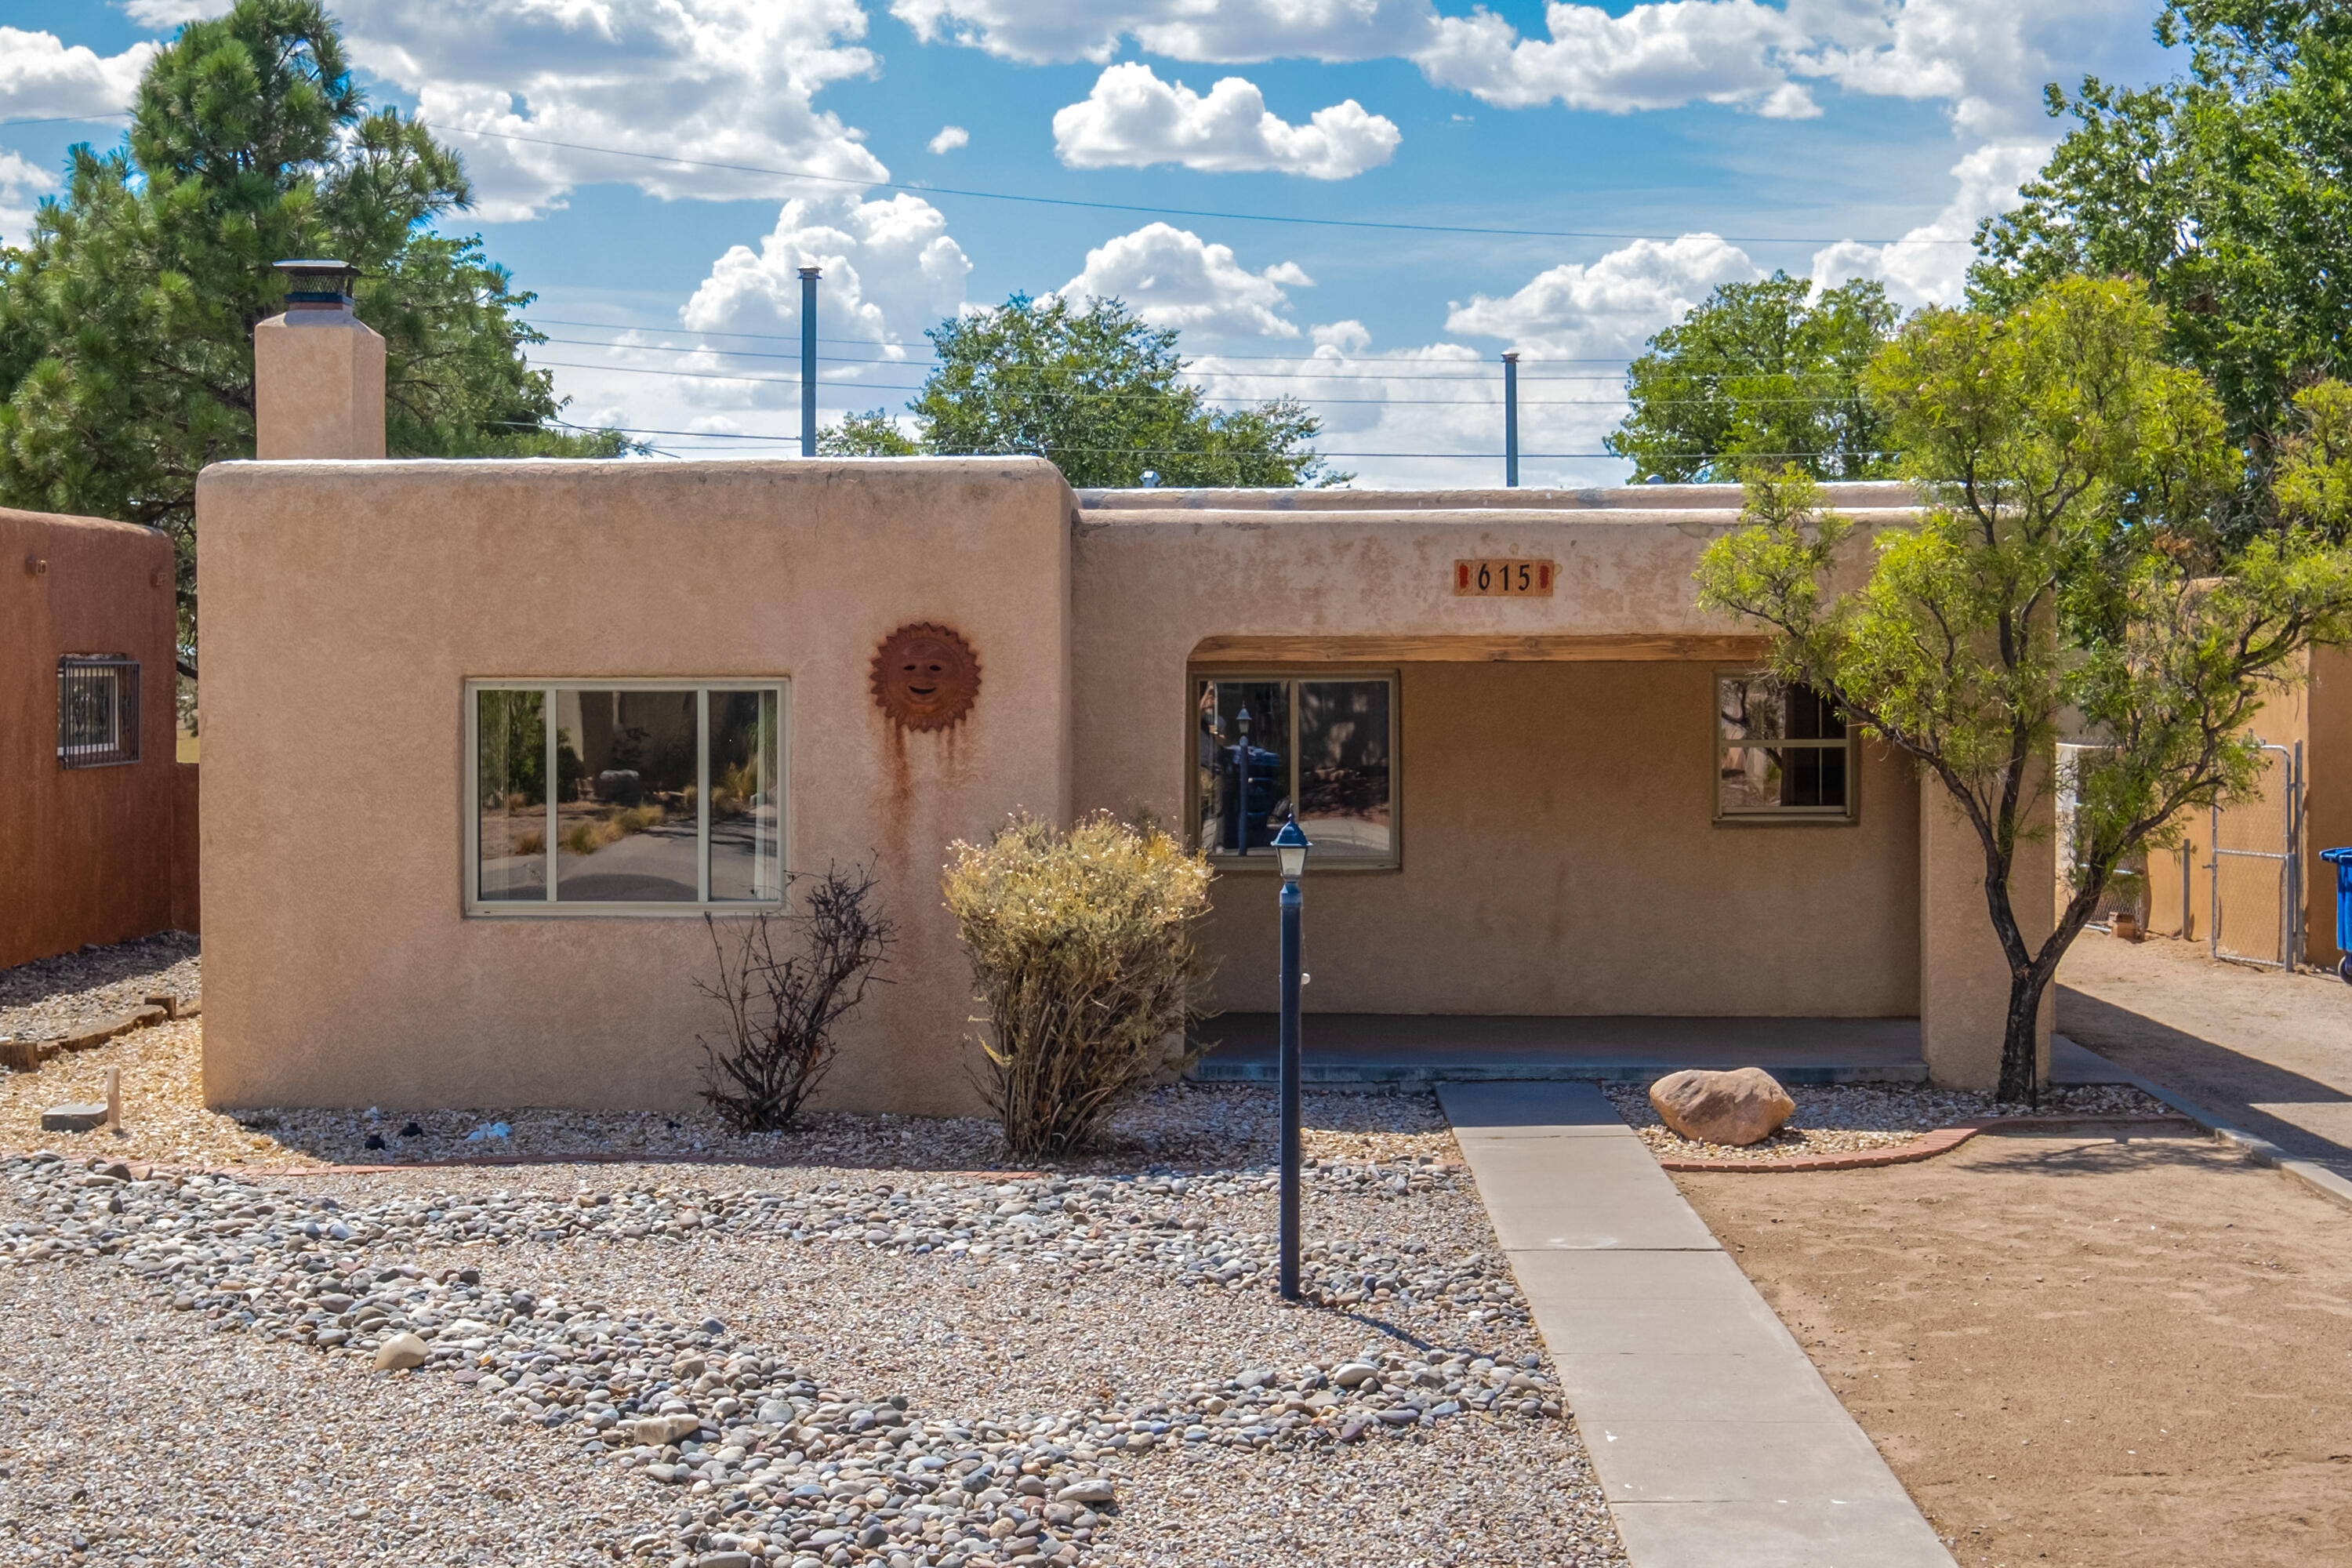 This Gem in Nob Hill Monte Vista is walking distance to UNM Hospital and only a few steps more to the main or north UNM campus. So close to everything! Quality features include gorgeous wood flooring, updated kitchen and bathrooms, and newer windows and stucco! The electrical wiring was updated; and a Split System was added to cool and heat the detached garage. This home is versatile! It has over 300 sf of finished basement; and the 480+, partially finished detached garage is equipped with a bath and kitchenette. It could easily be completed as guest or in-law quarters, or a spacious office or art studio. There is also plenty of yard for entertaining or gardening... This beautiful home, in its super great location has it all! Schedule to see why it's going to sell quickly